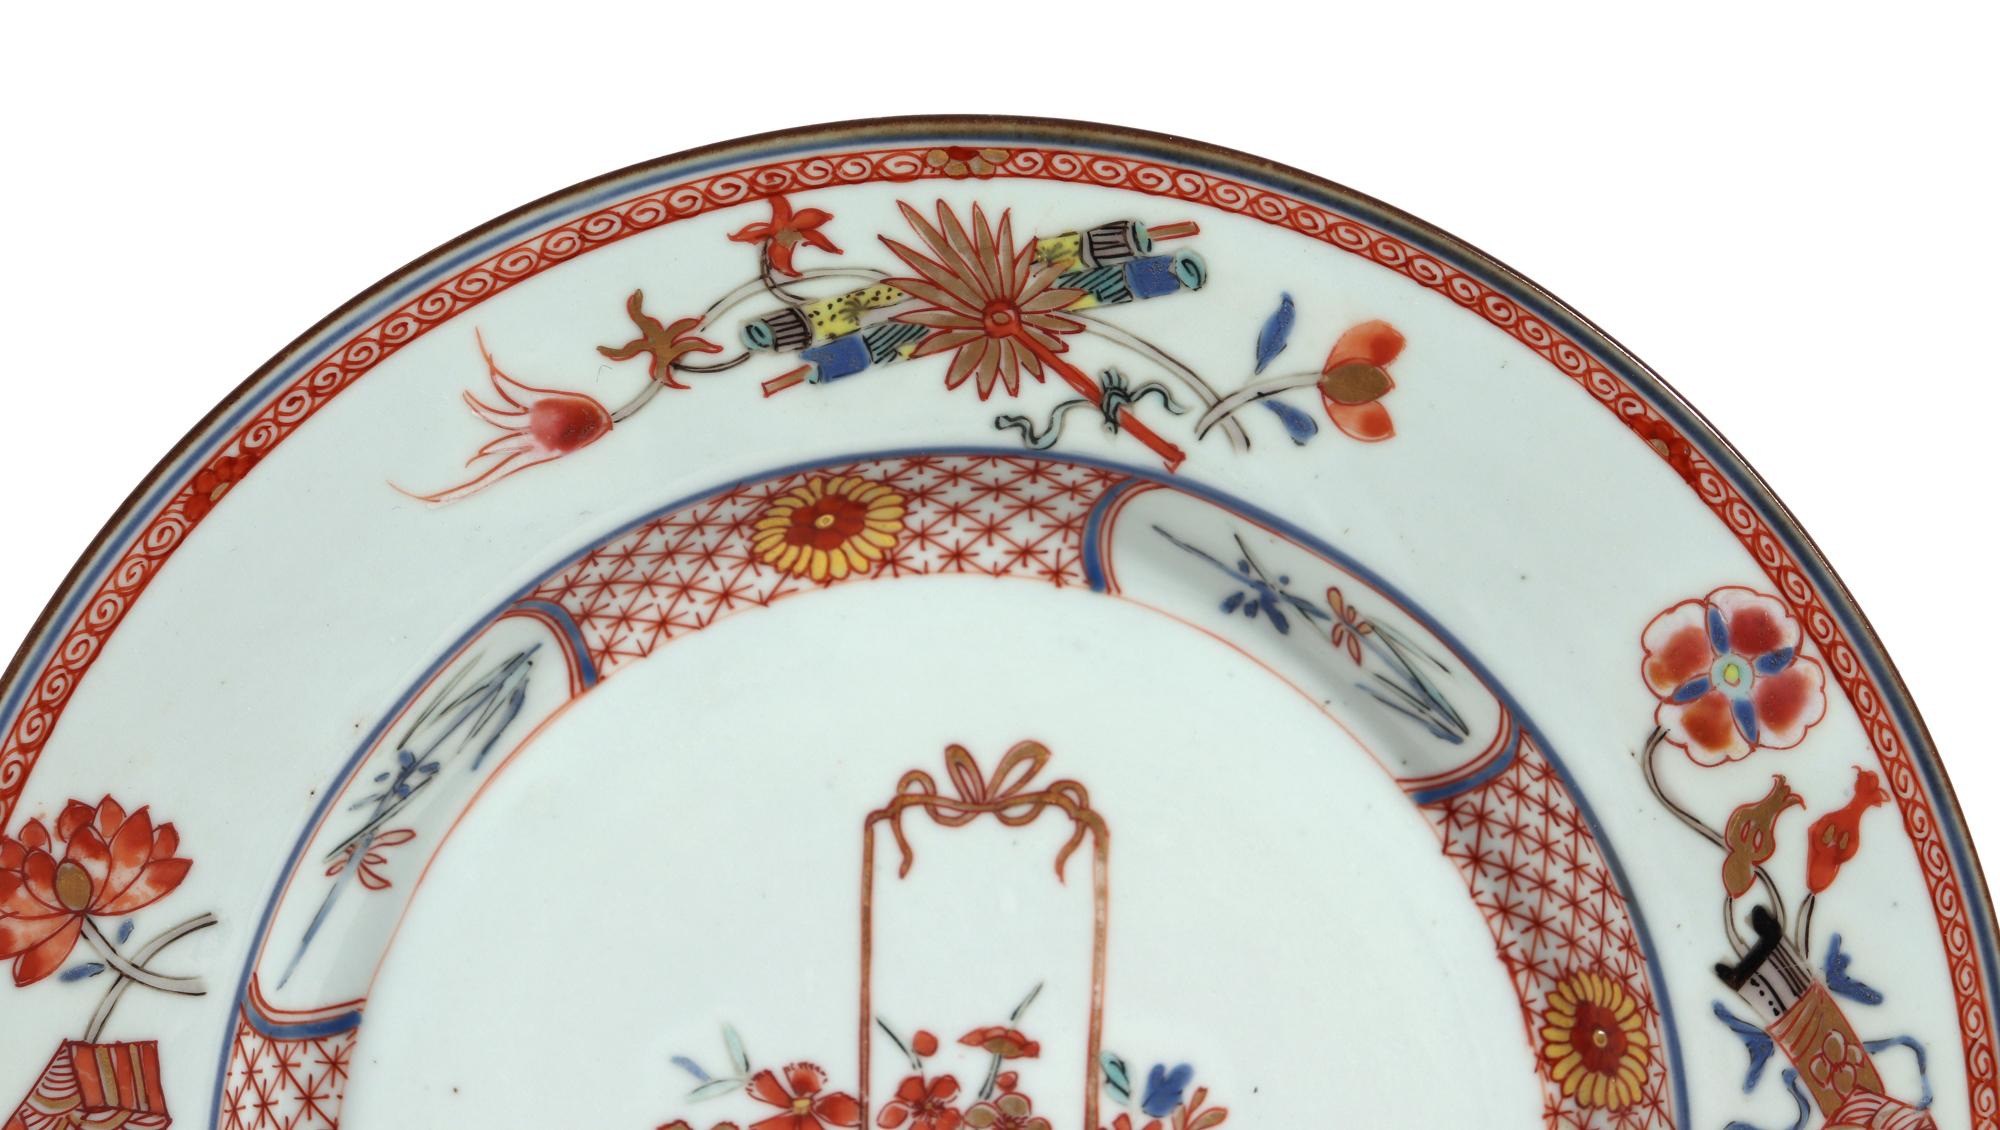 Chinese Export Porcelain Famille Rose-Verte Plates Painted with A Flower Basket For Sale 6